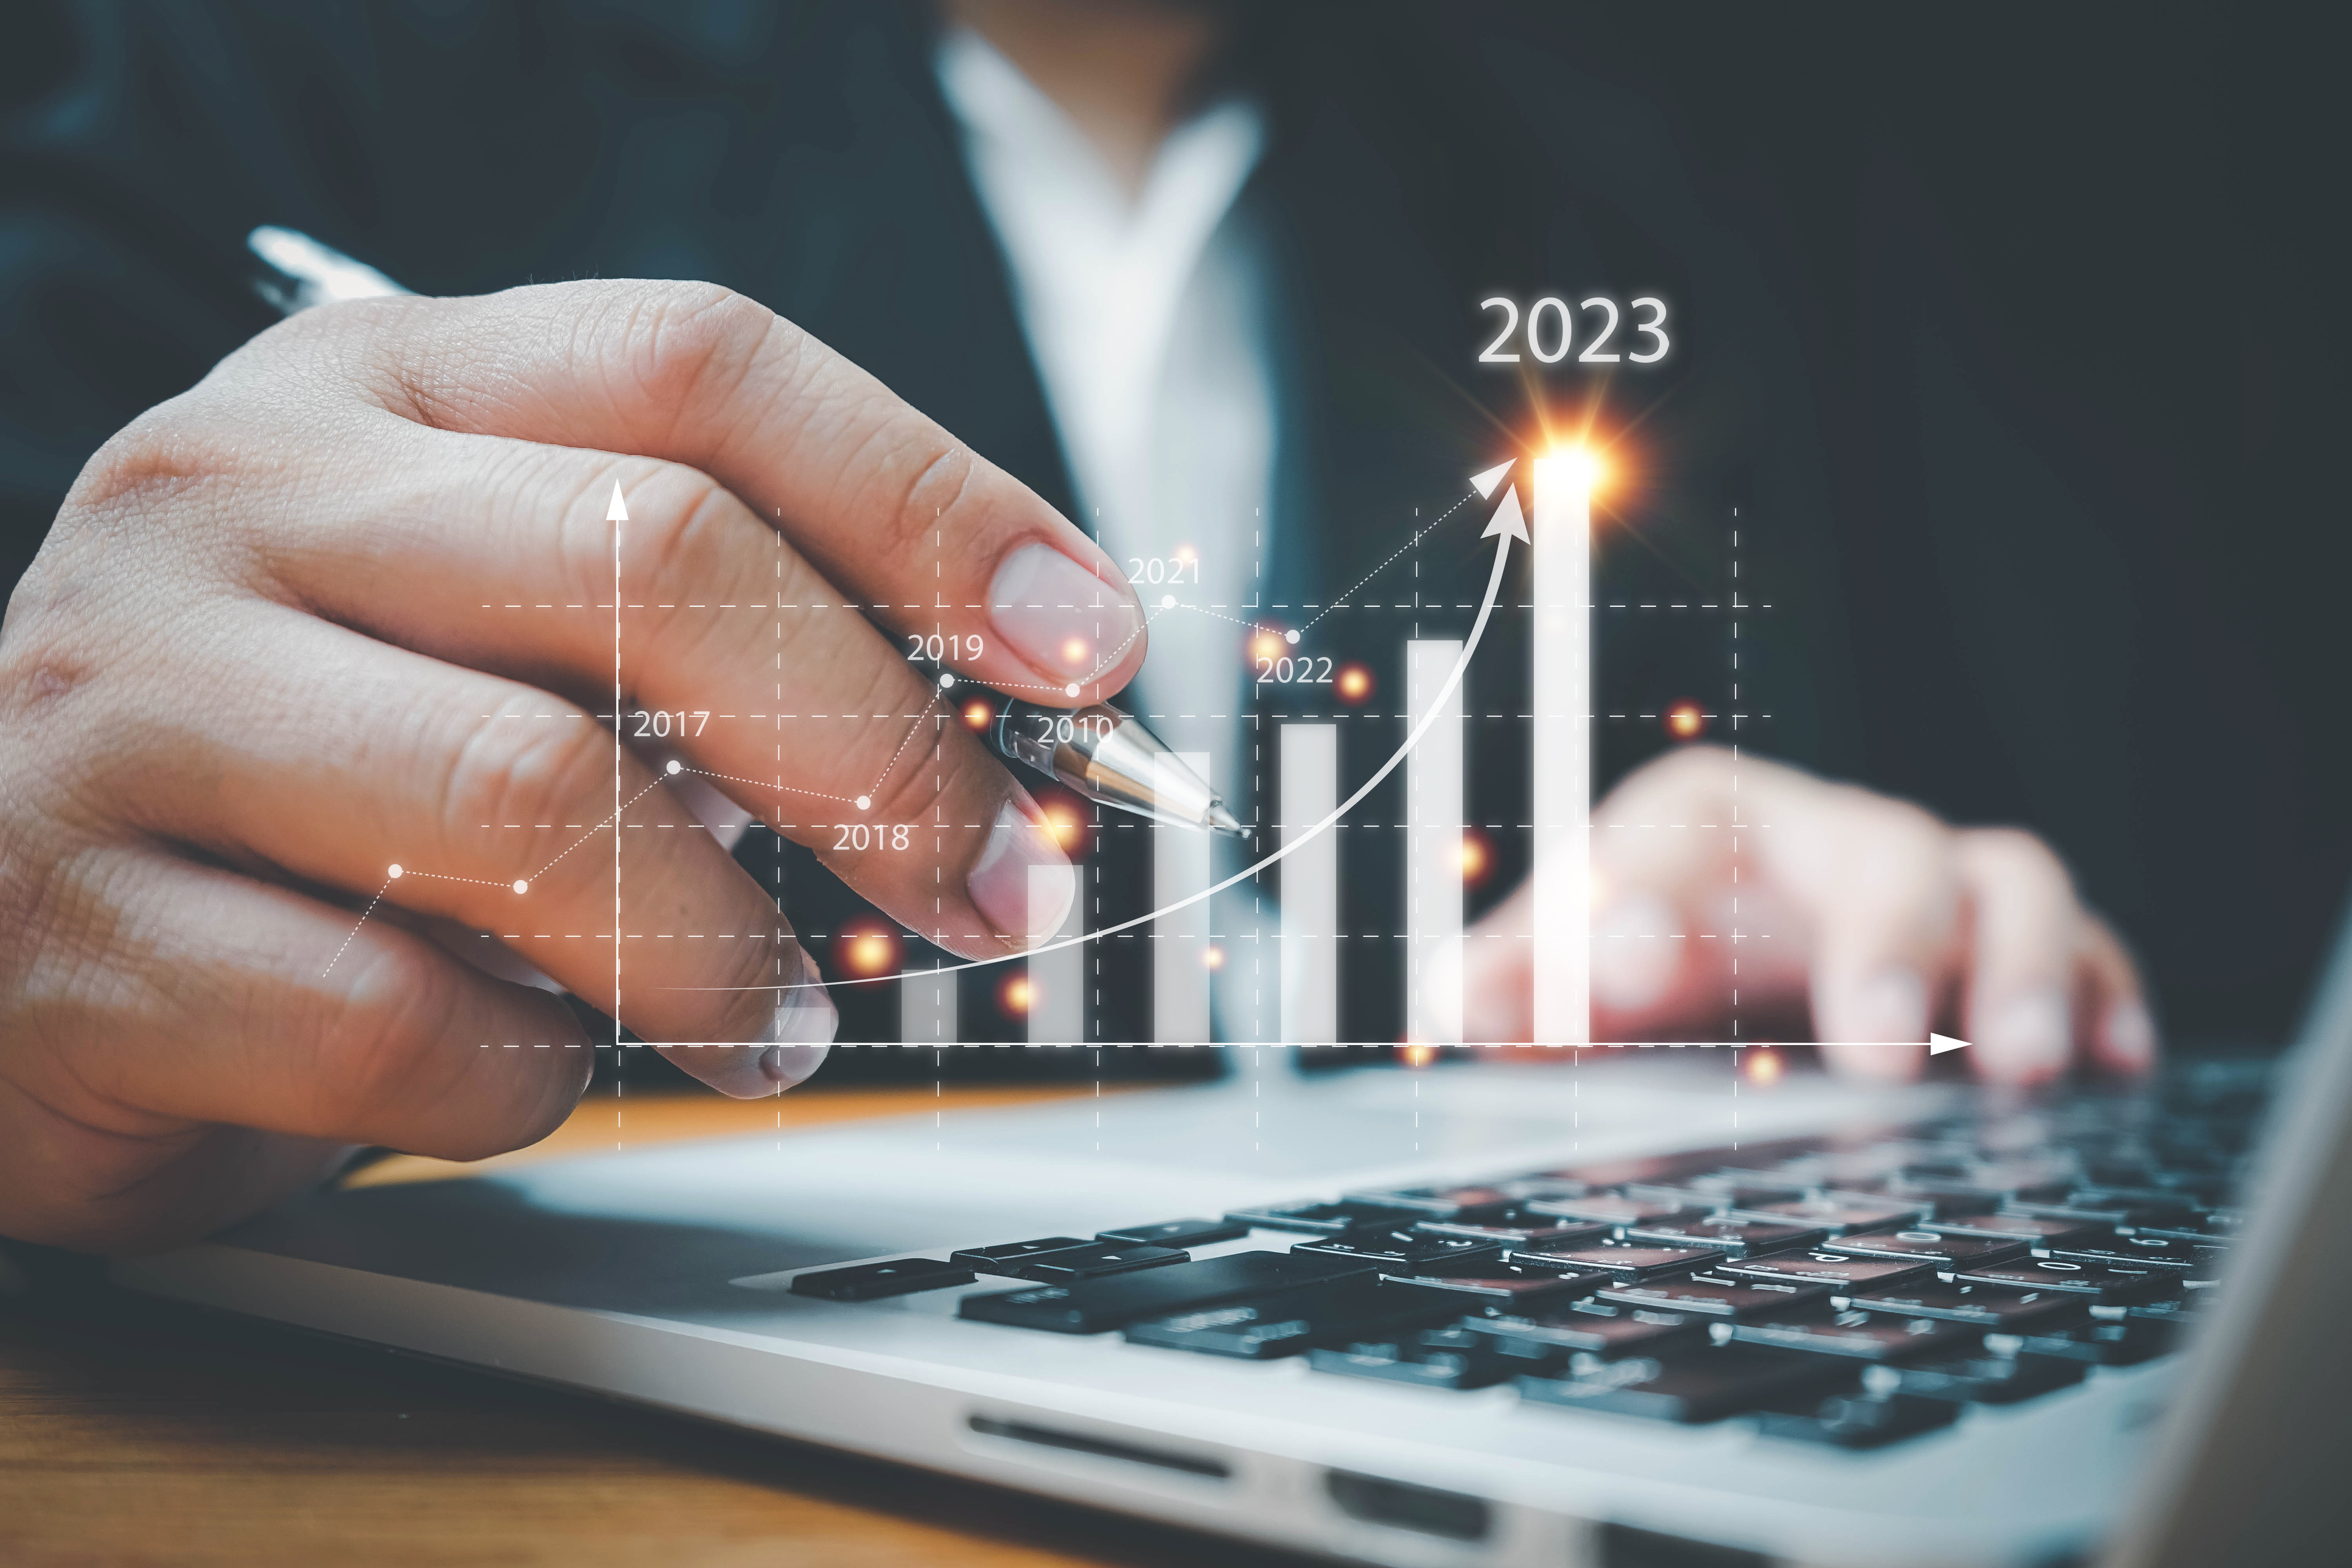 3 Technology Trends Set to Impact Businesses in 2023